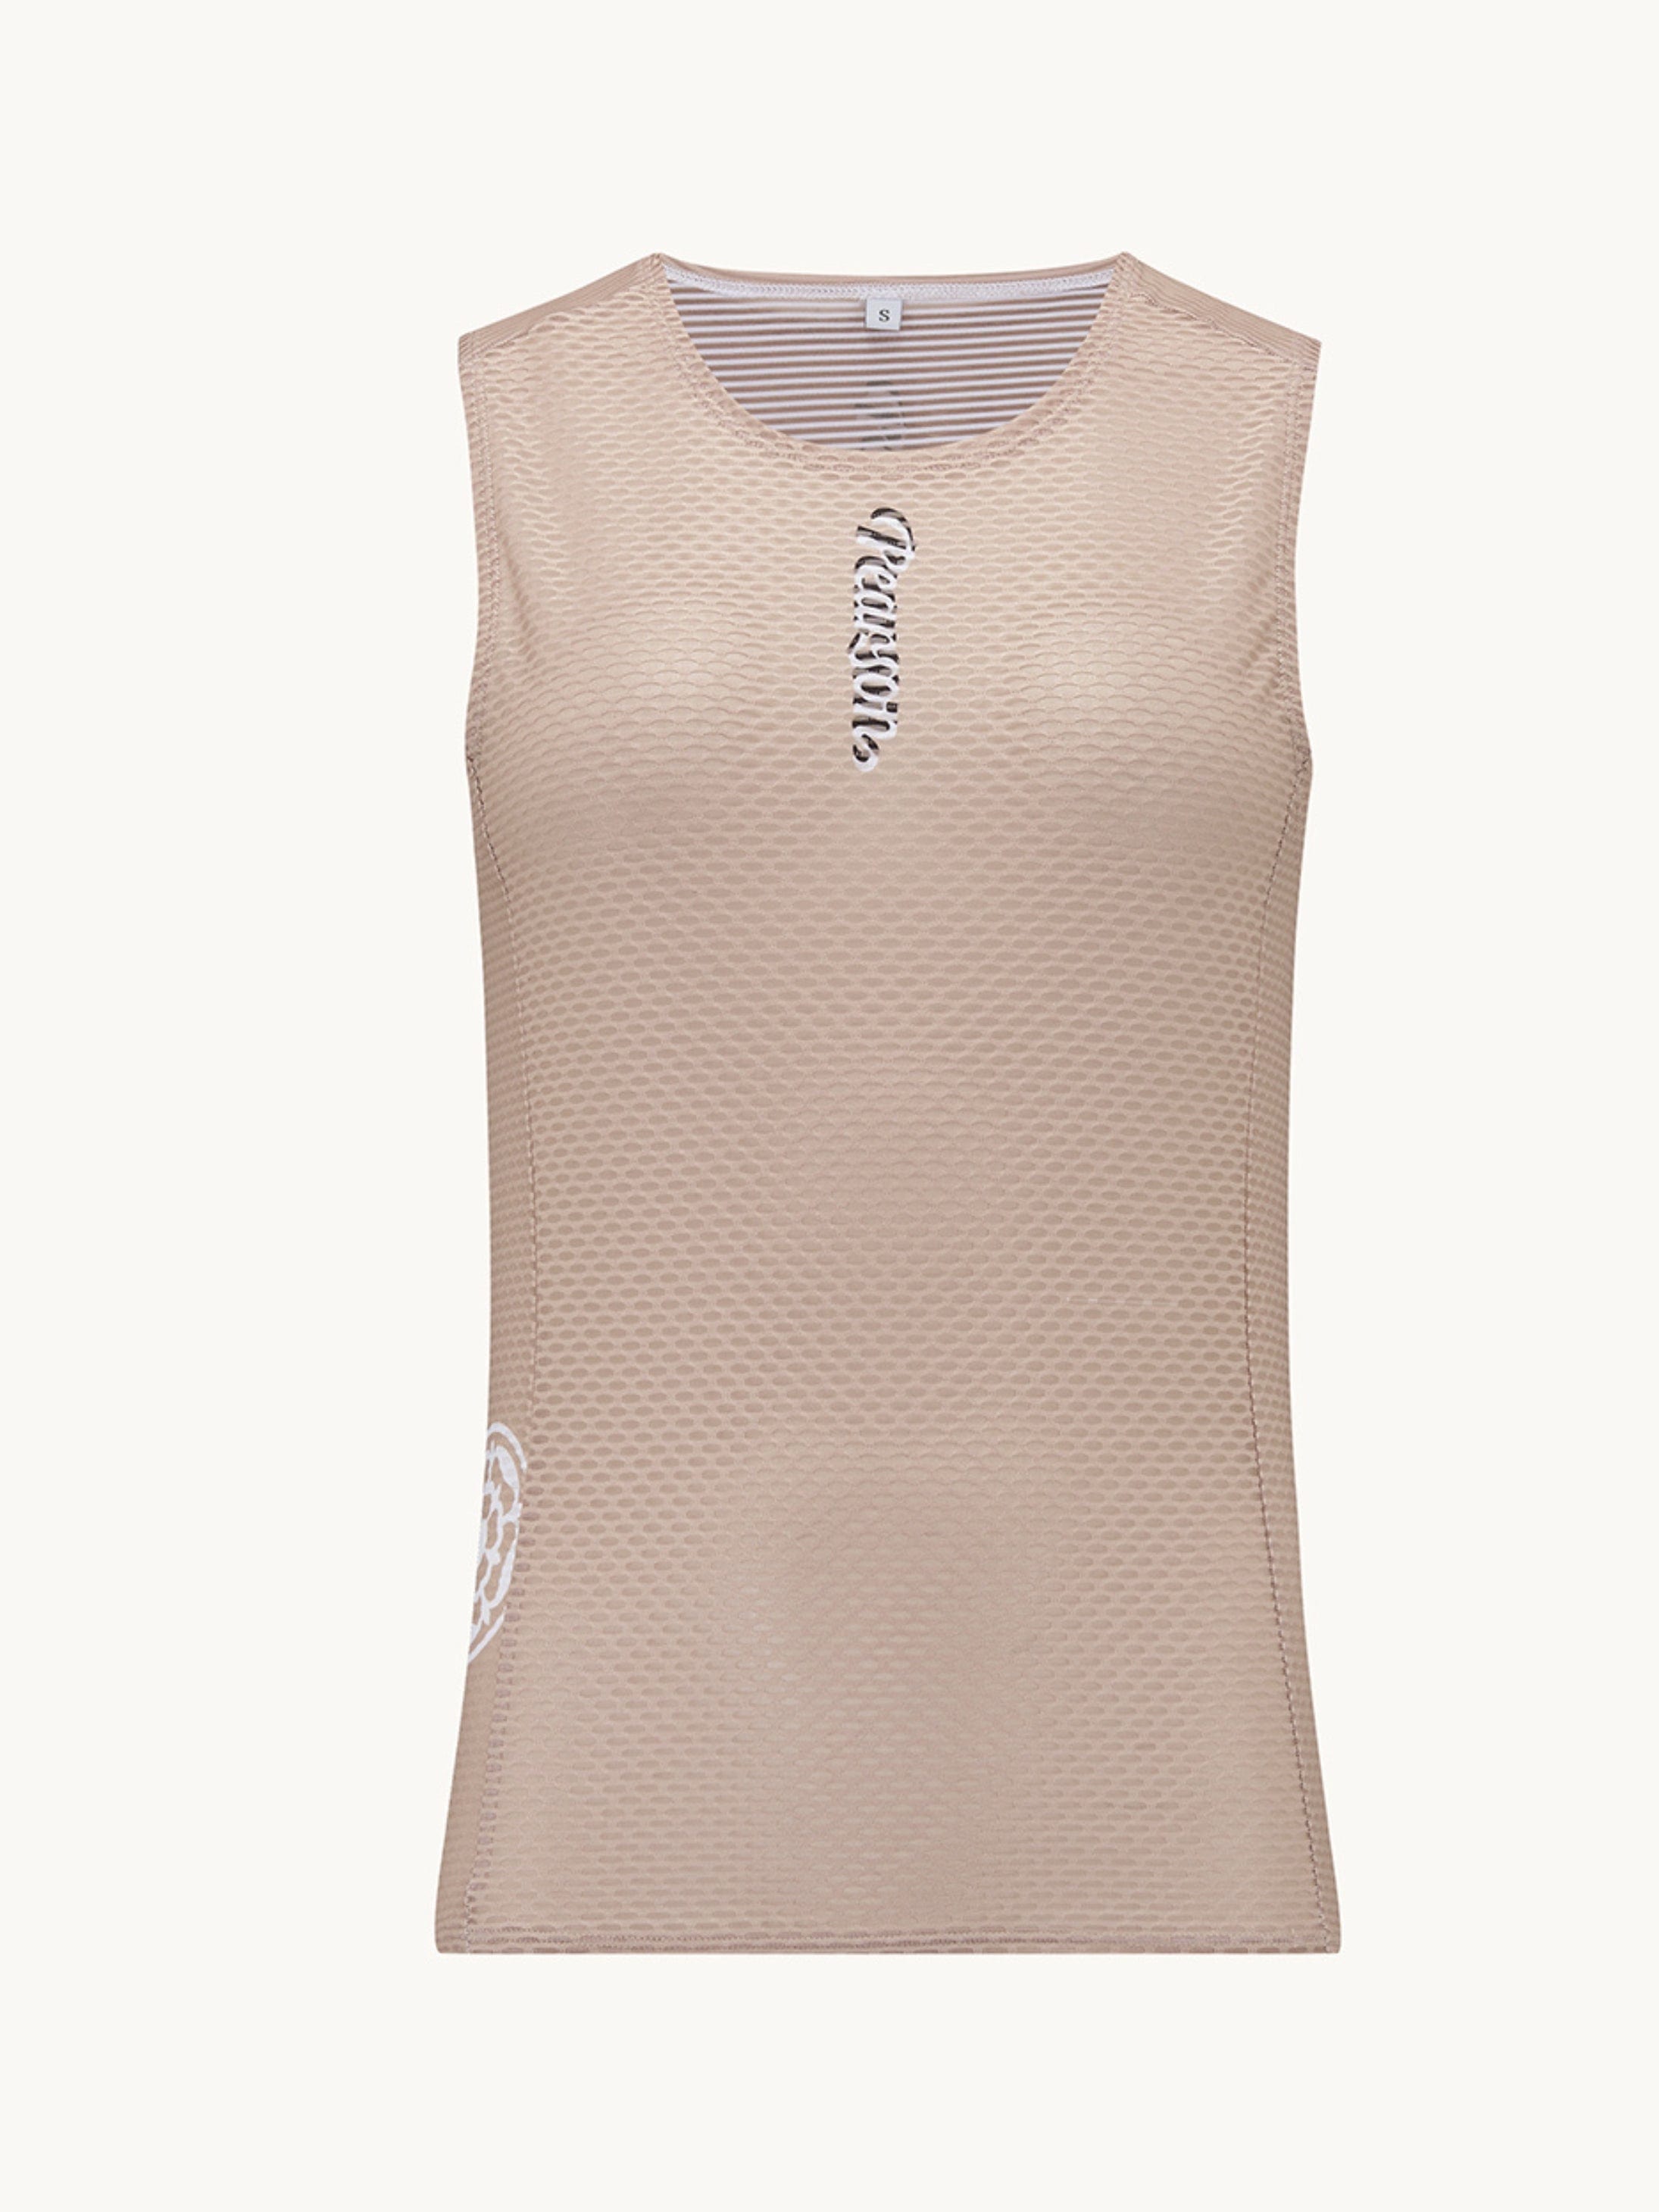 Pearson Cycles Pearson1860, Long Hot Summer - Unisex Sleeveless Base Layer Sand, Sand / M